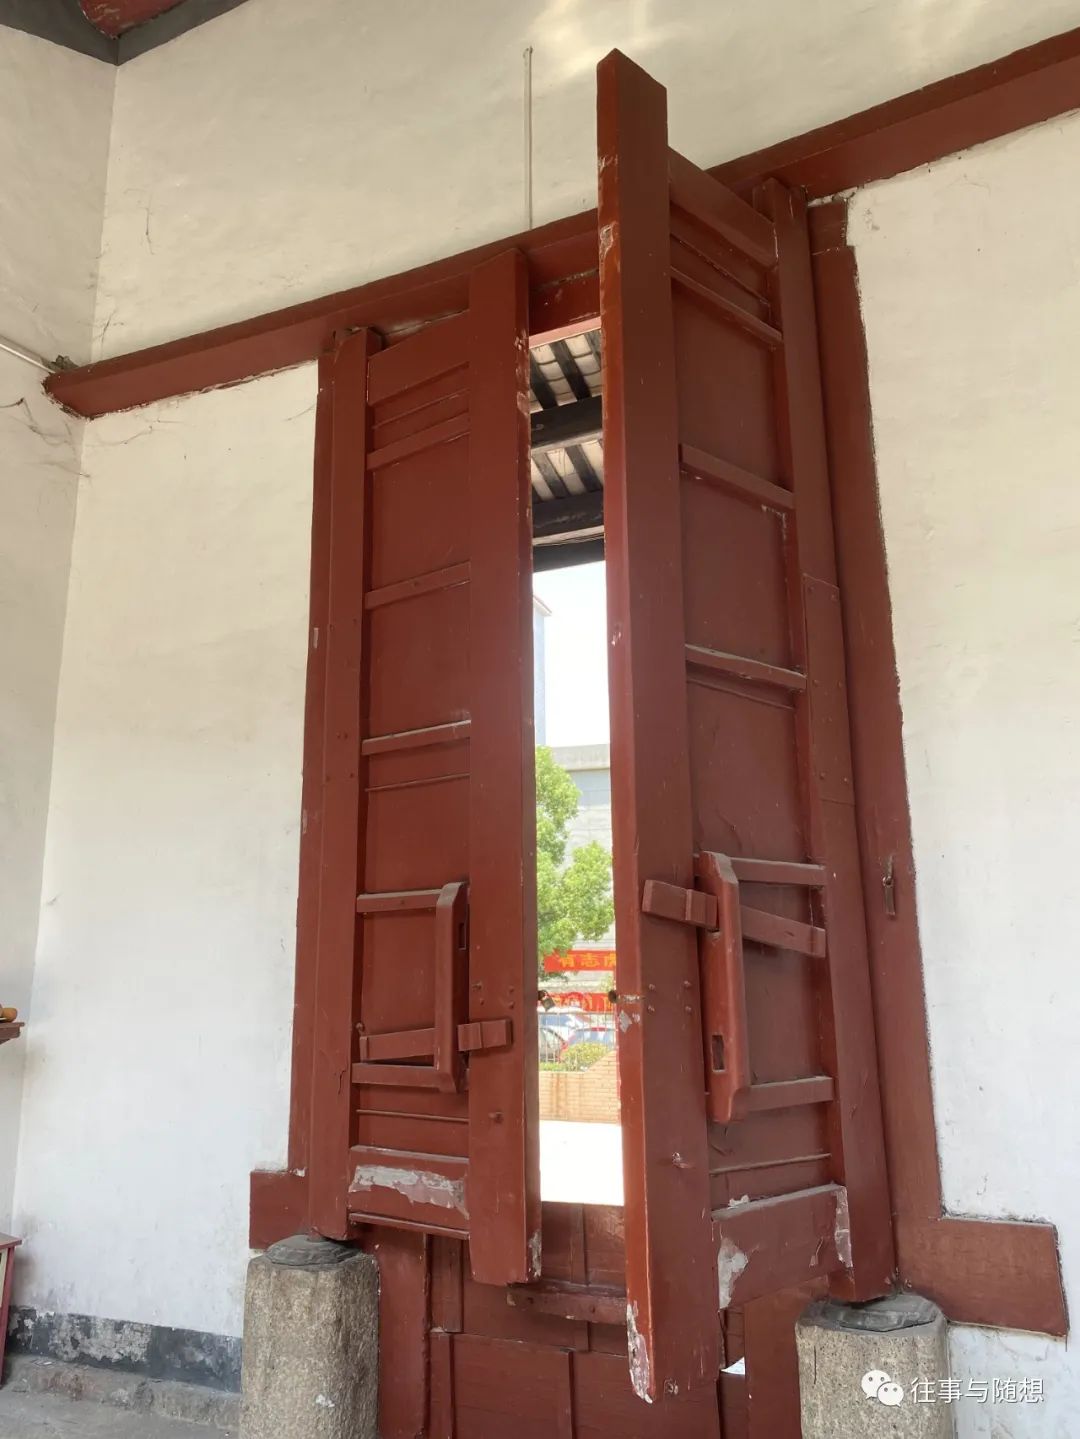 A very tall, red Chinese style wooden door, set into a white wall